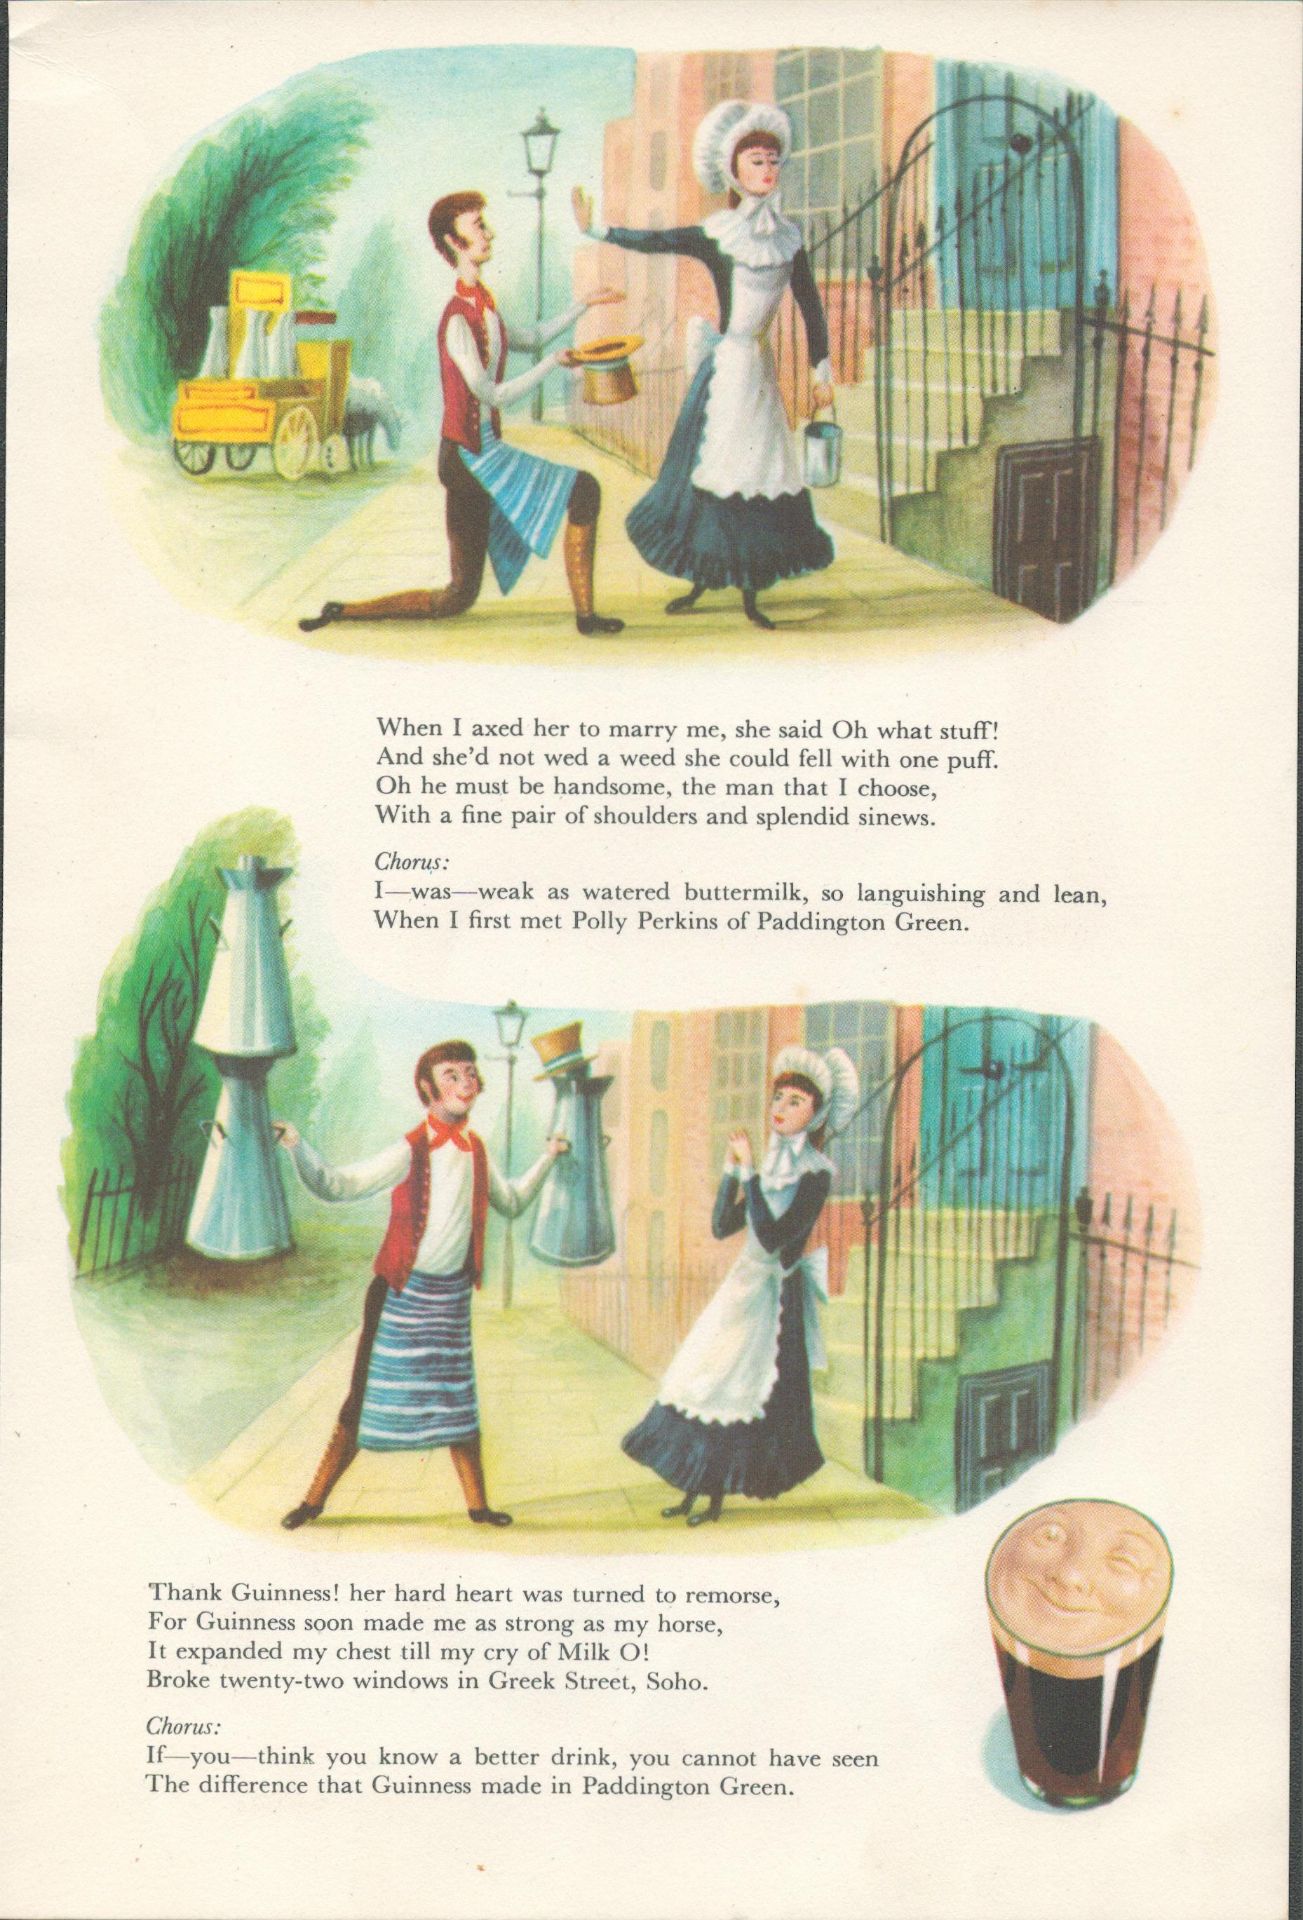 1954 Guinness Double Page Illustration 'Power Of the Law' & 'Marriage' - Image 2 of 2